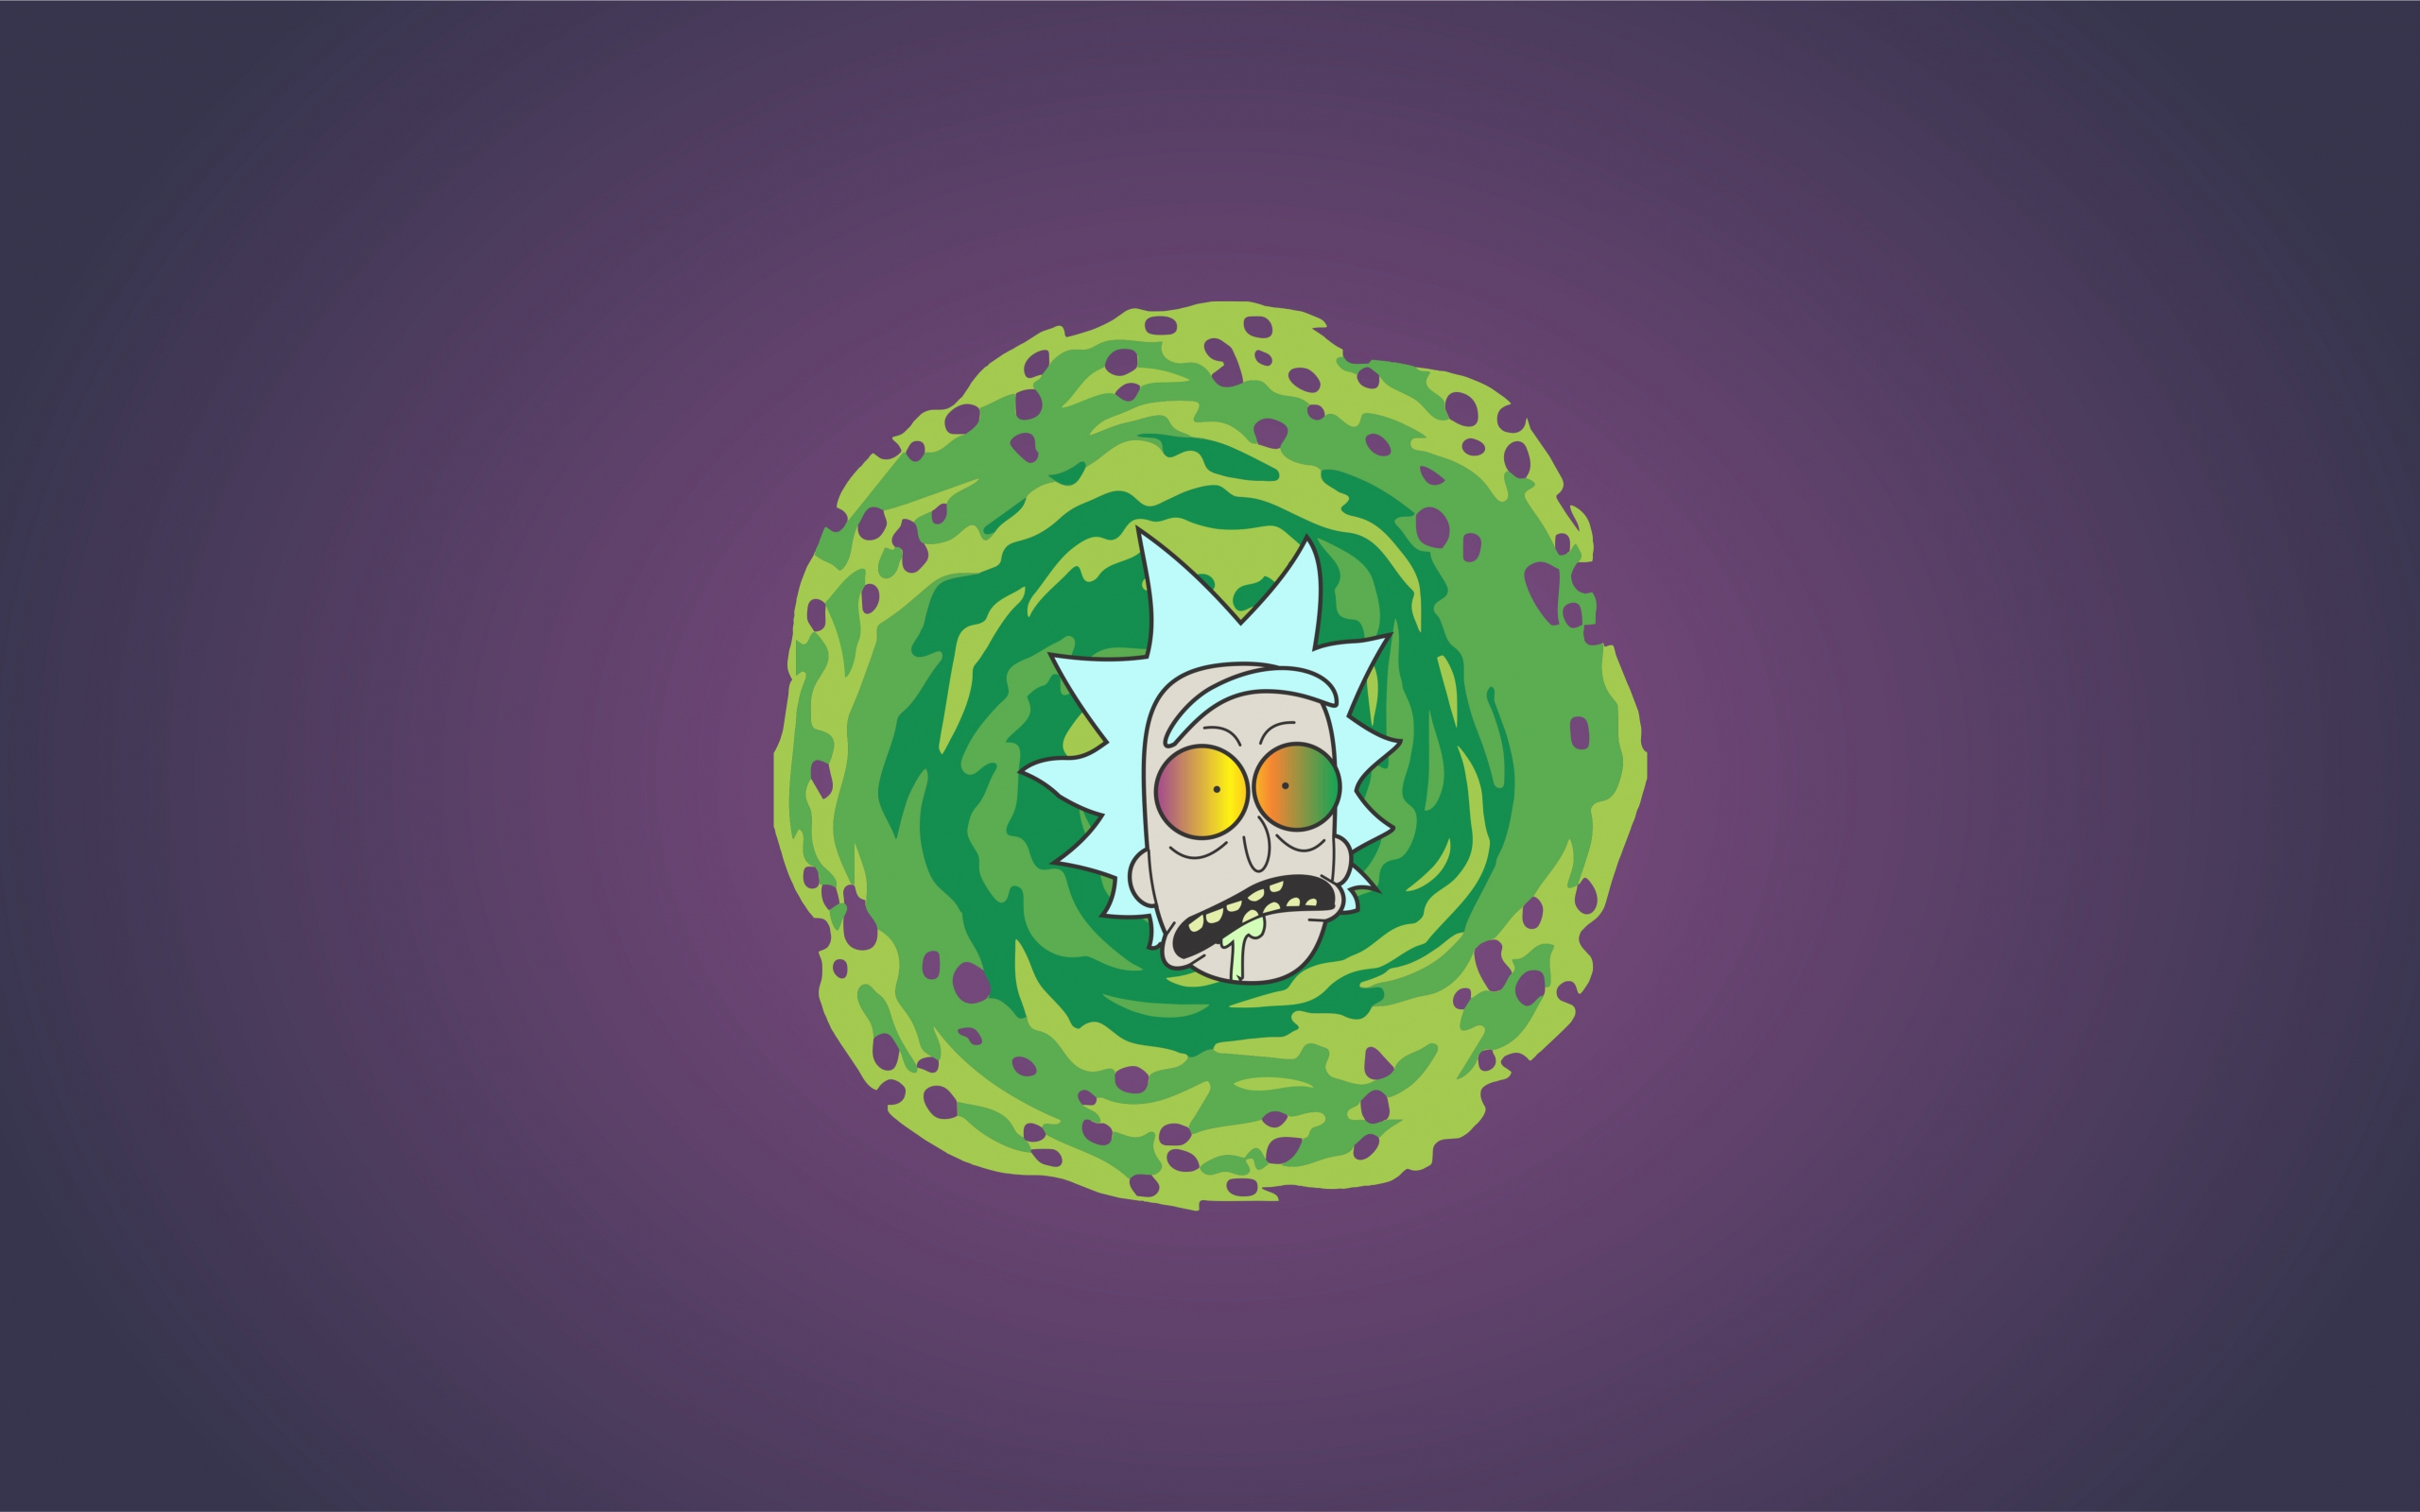 Download 2560x1600 Wallpaper Rick And Morty Tv Show Rick Minimal Dual Wide Widescreen 16 10 Widescreen 2560x1600 Hd Image Background 5861